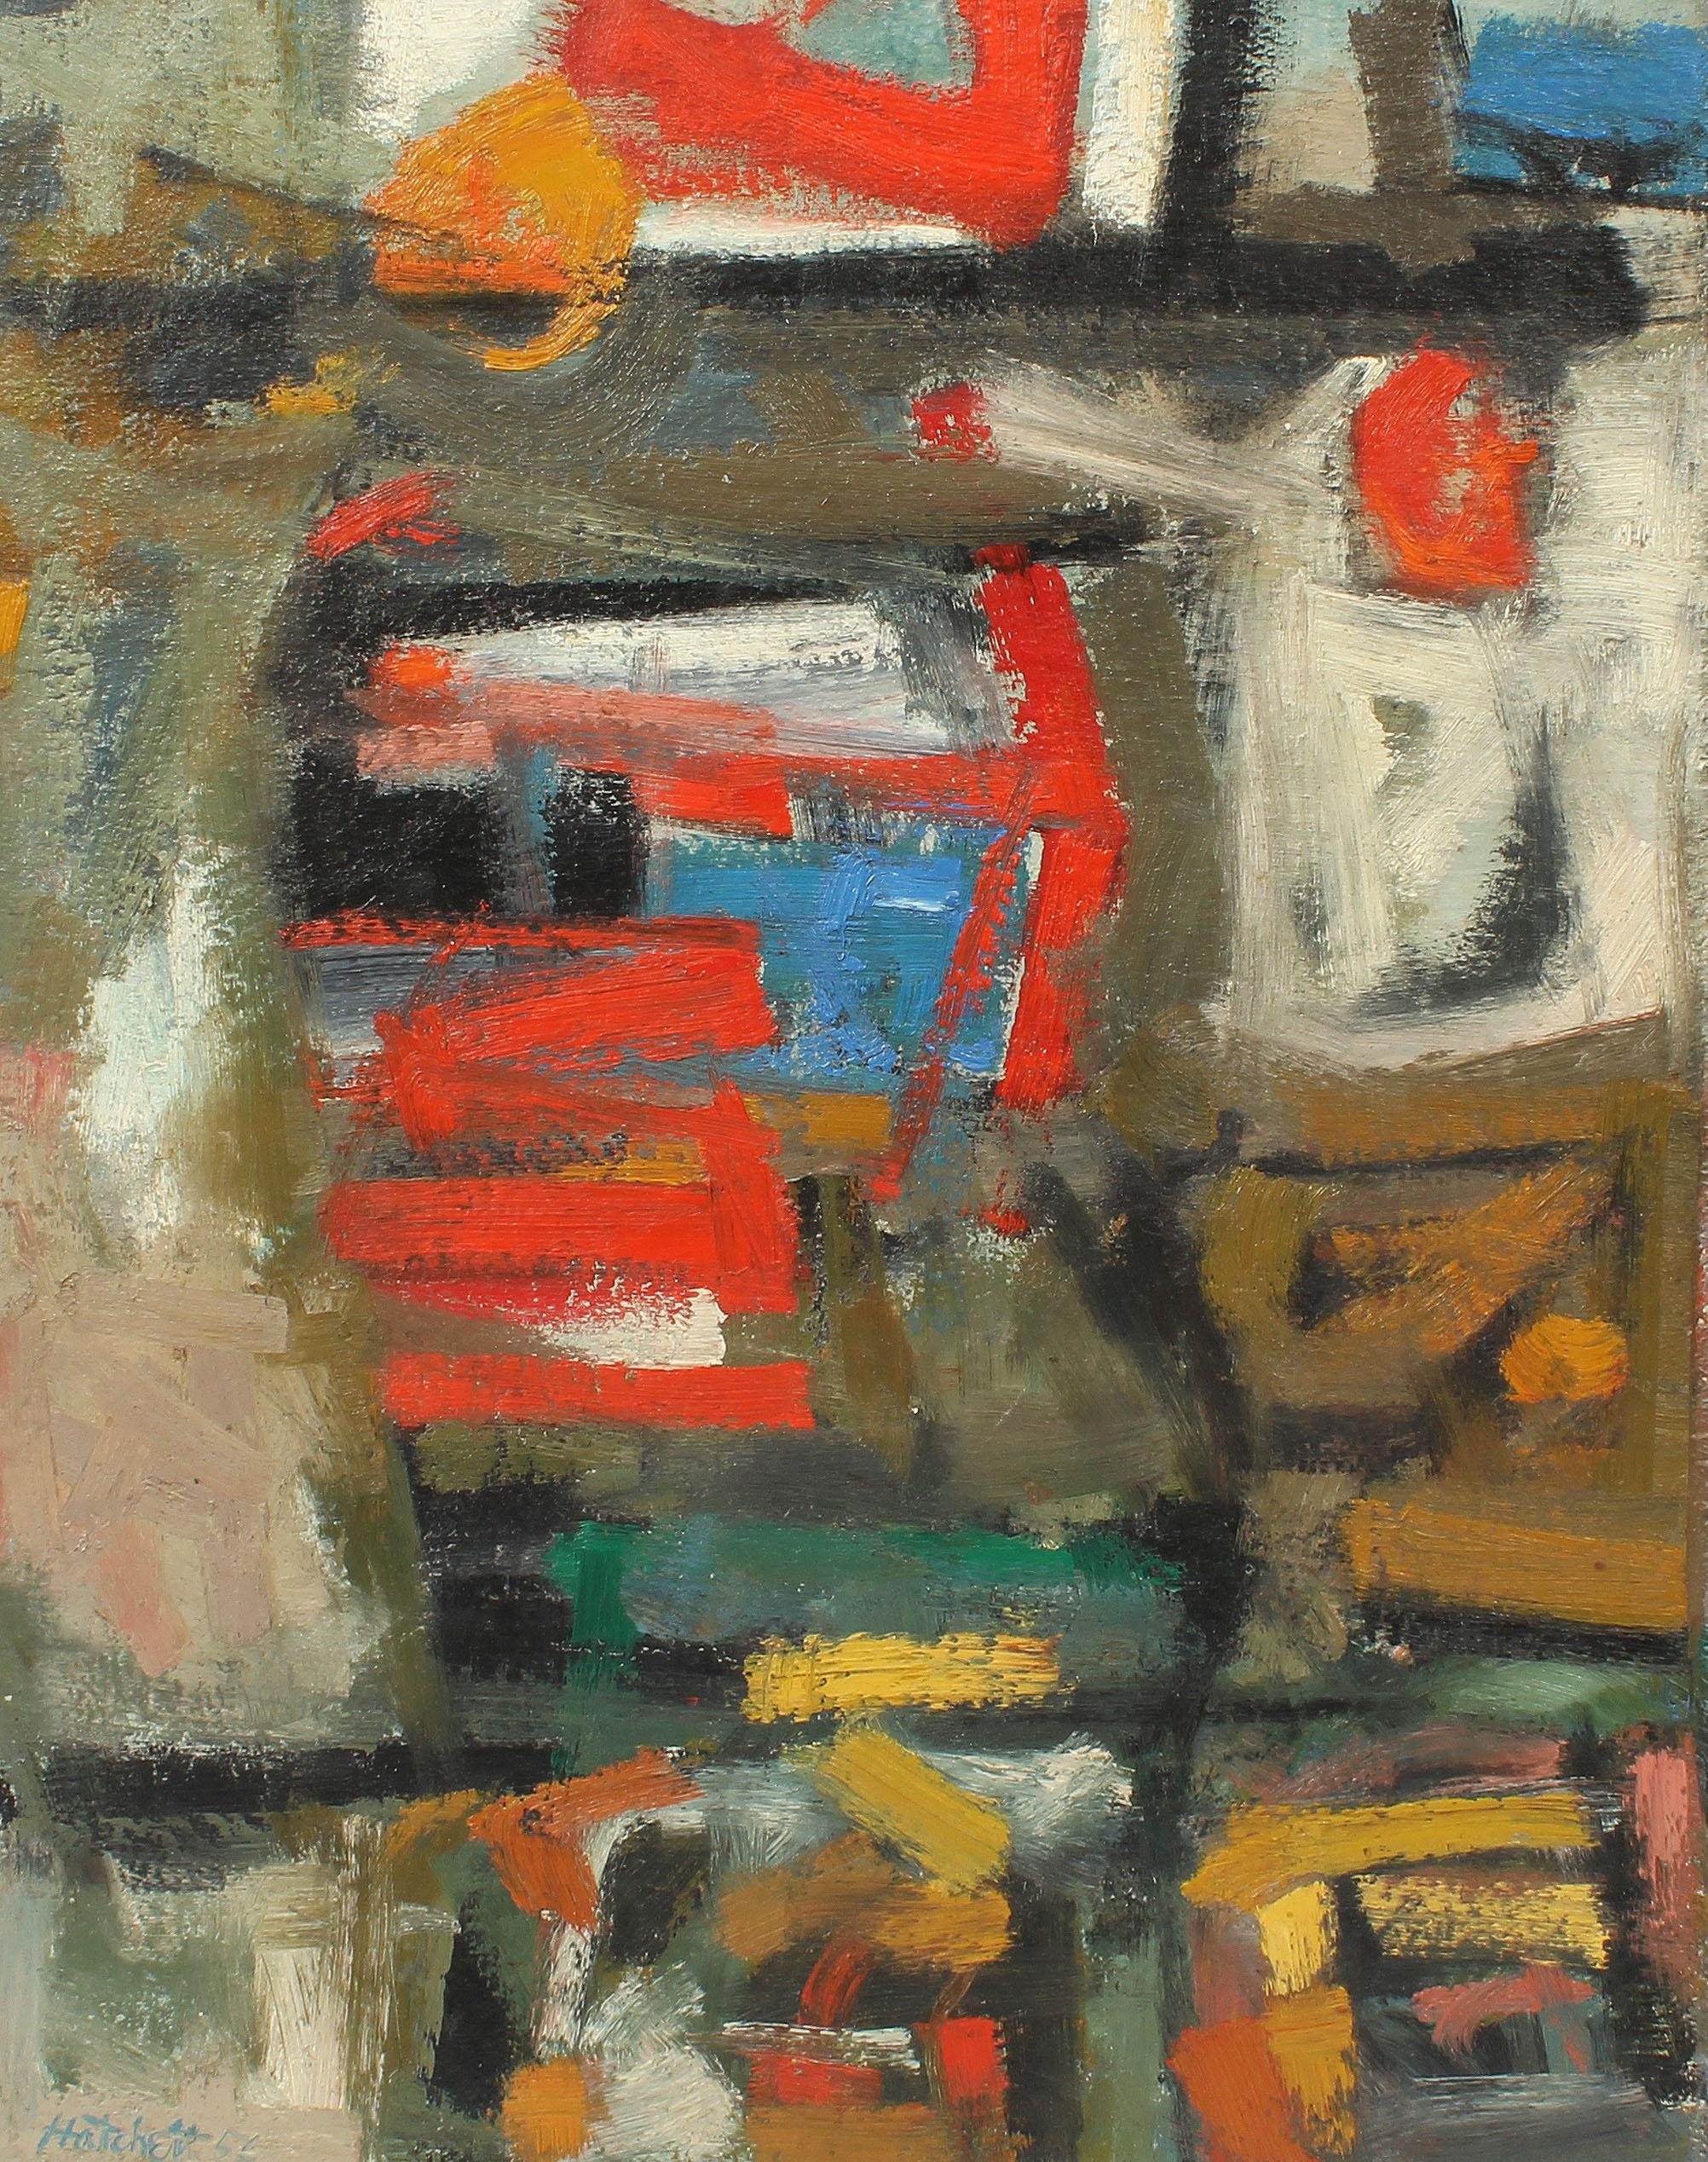 Antique American modernist abstract oil painting by Duayne Hatchett (1925 - 2015).  Oil on board, circa 1956. Signed.  Displayed in a period mdoern frame.  Image, 18